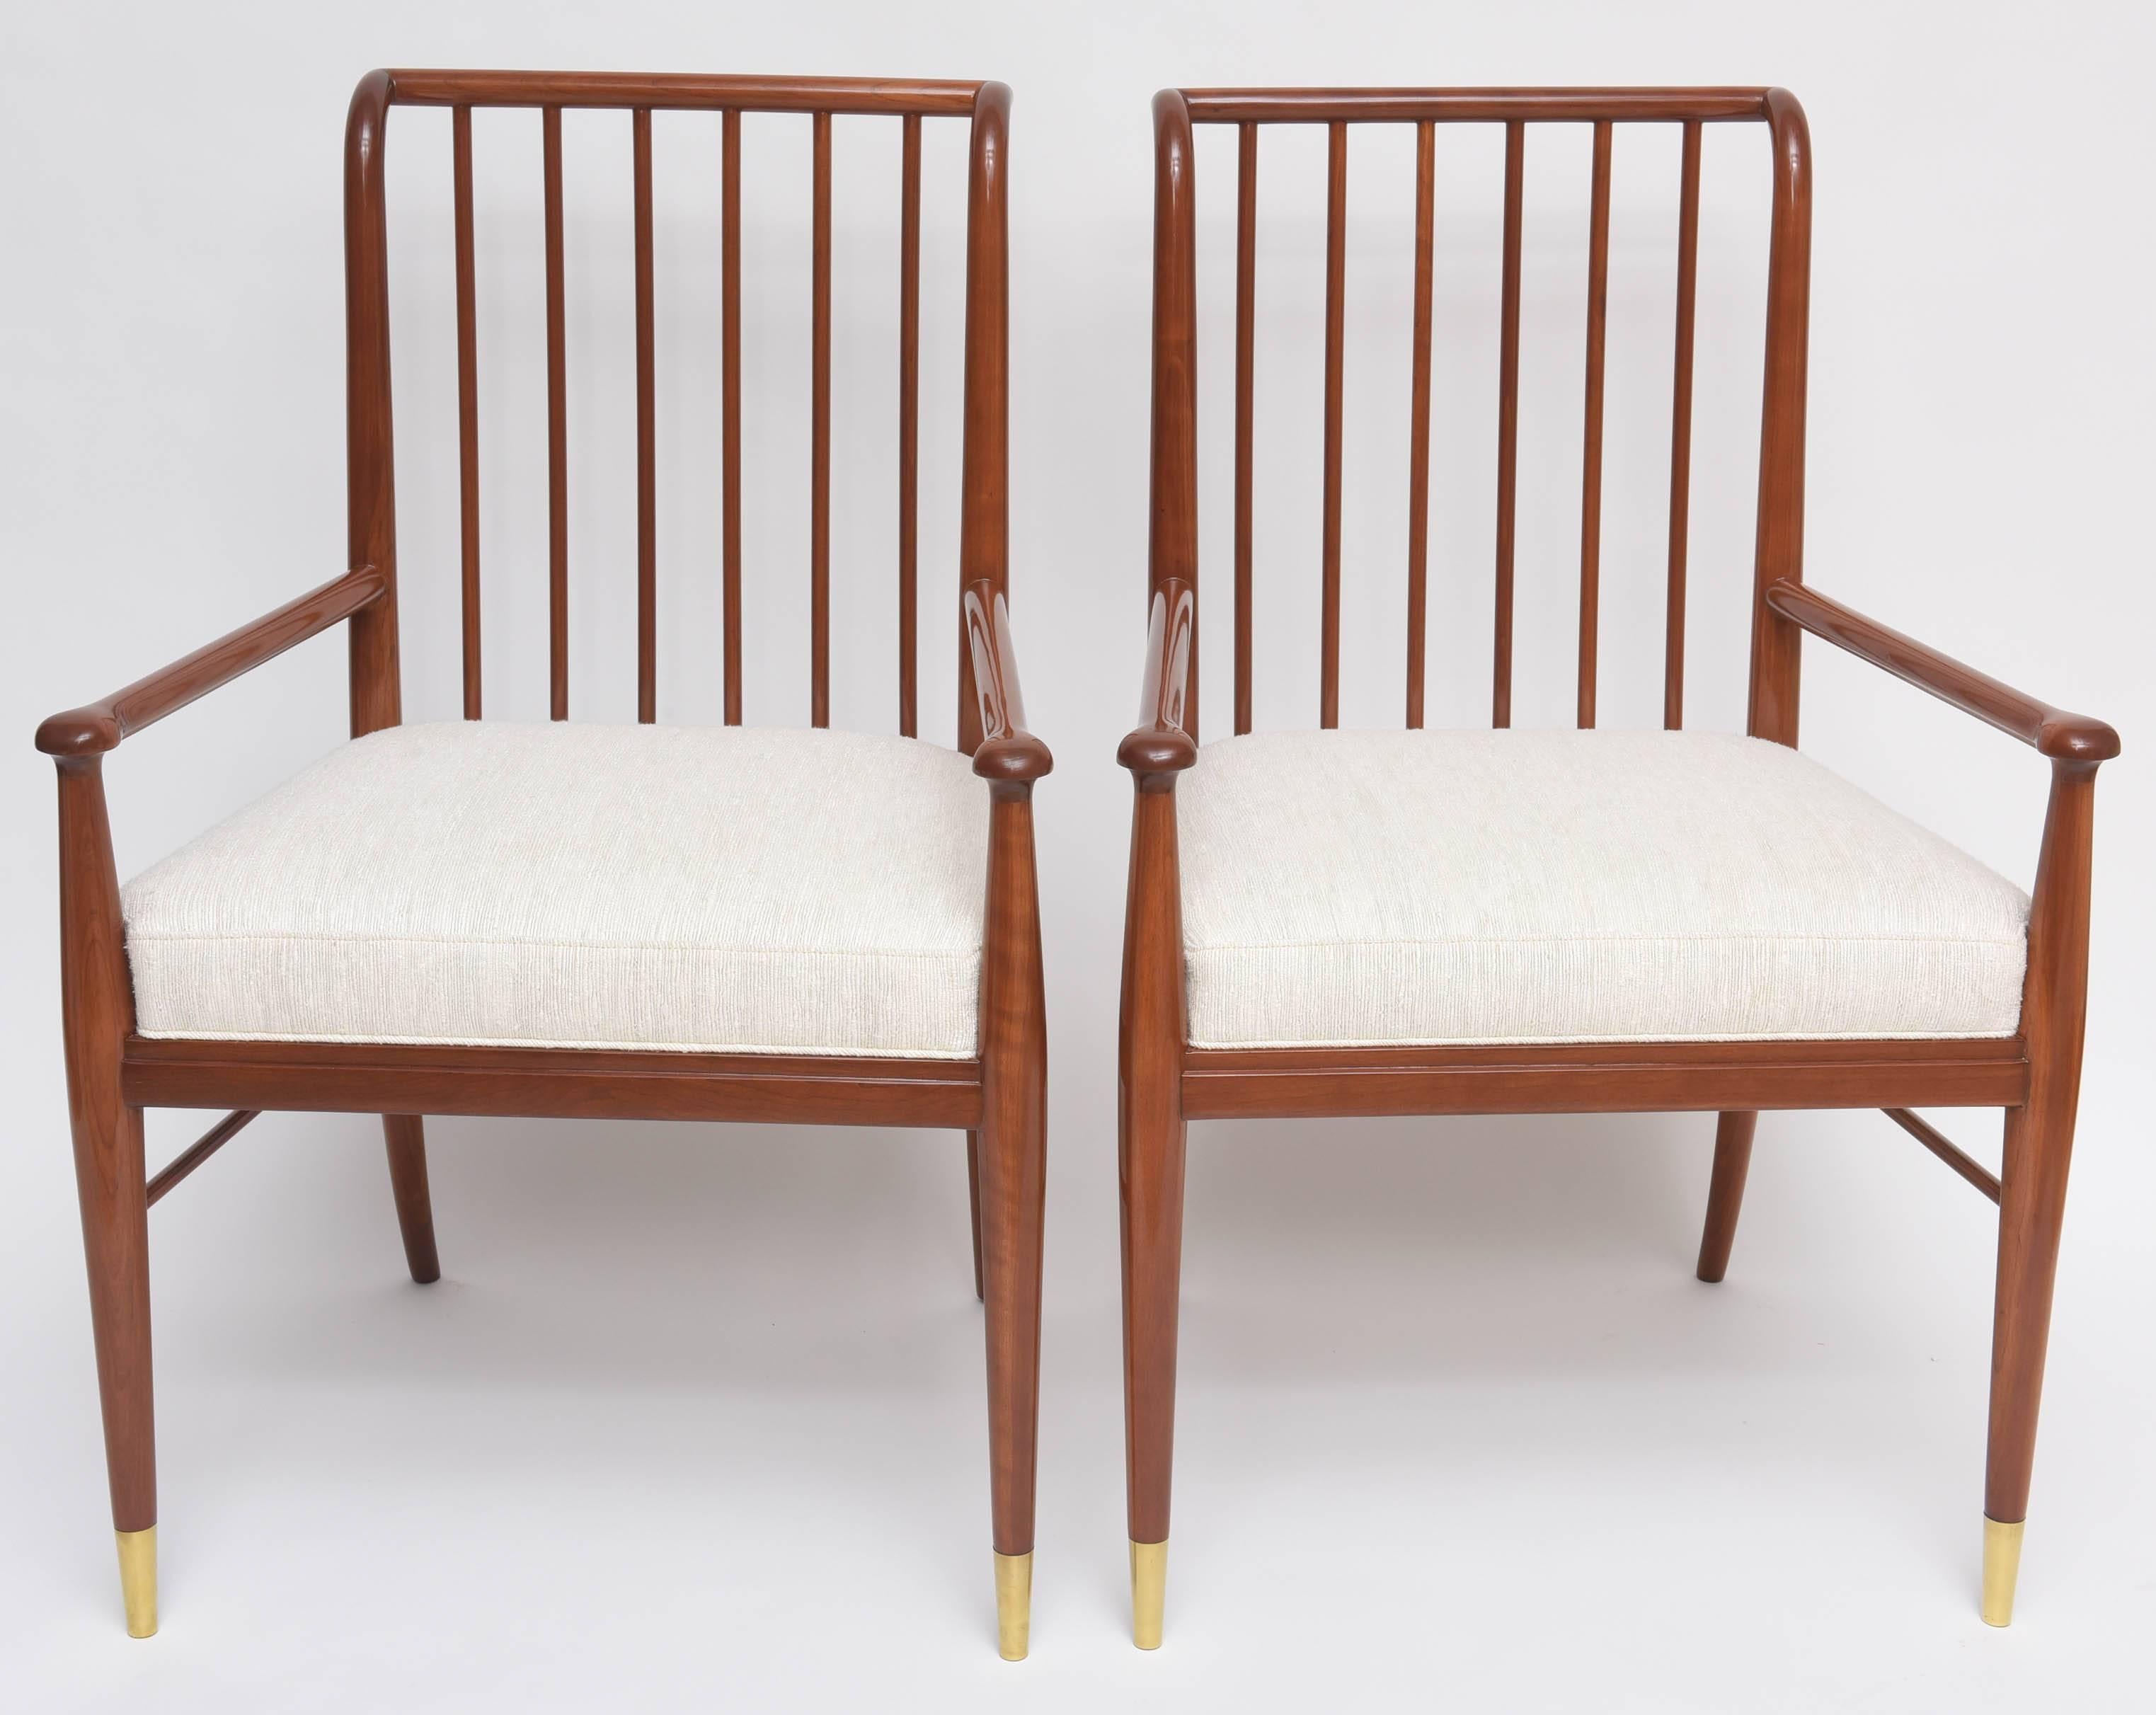 Handsome pair of armchairs by J. Stuart Clingman for Widdicomb. Piano-finished walnut frames with polished brass sabots and new silk upholstery.